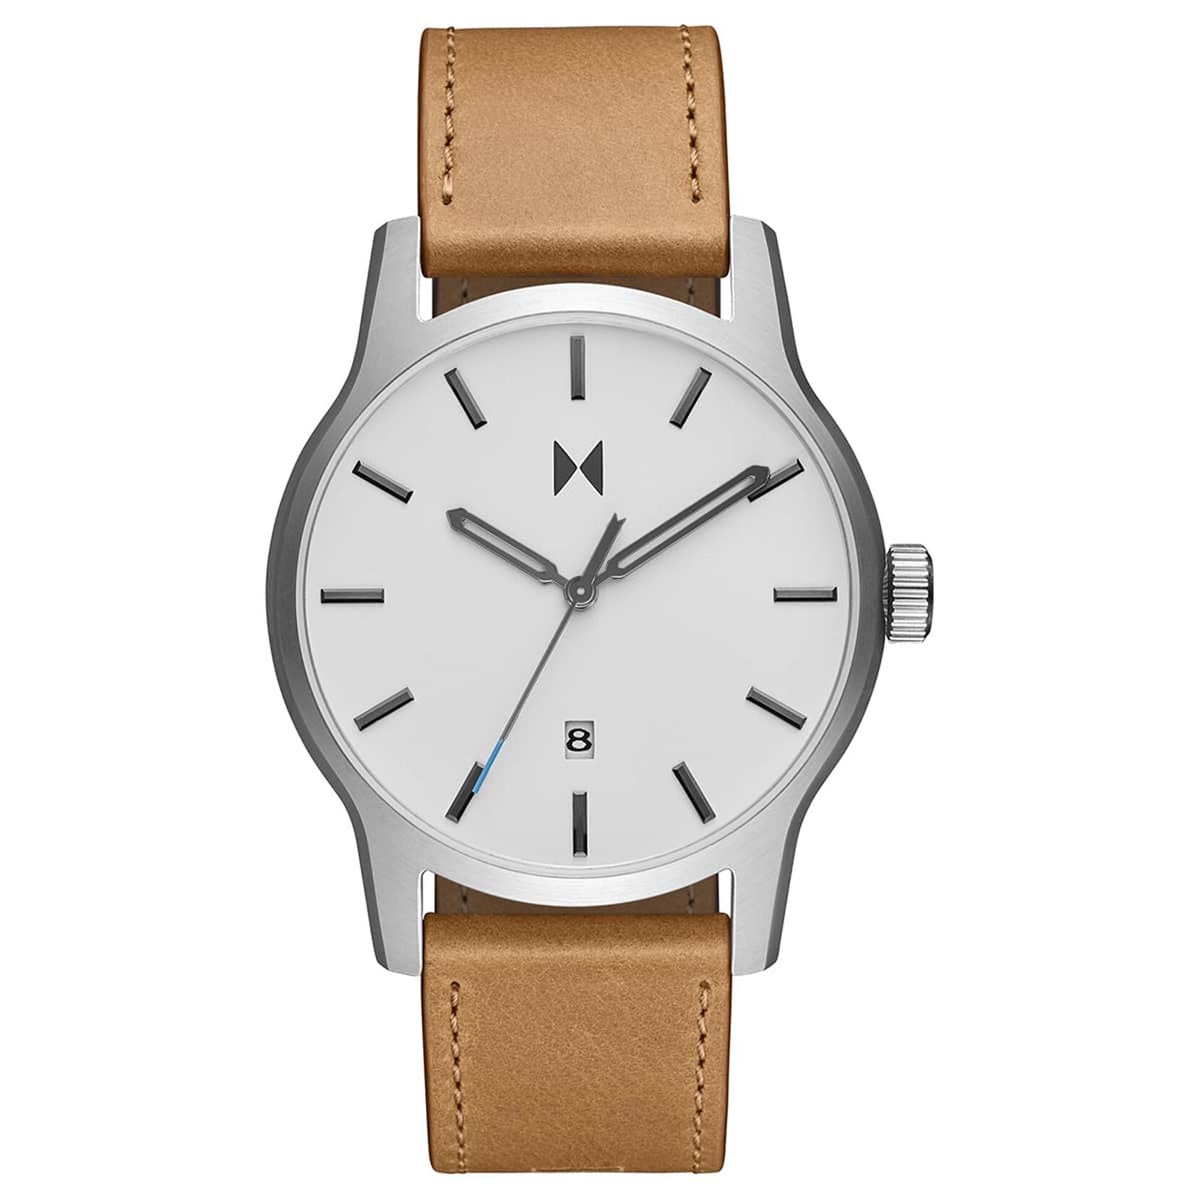 MVMT by Movado Classic II Mens Watch with White Dial and Tan Leather Strap (quartz movement)